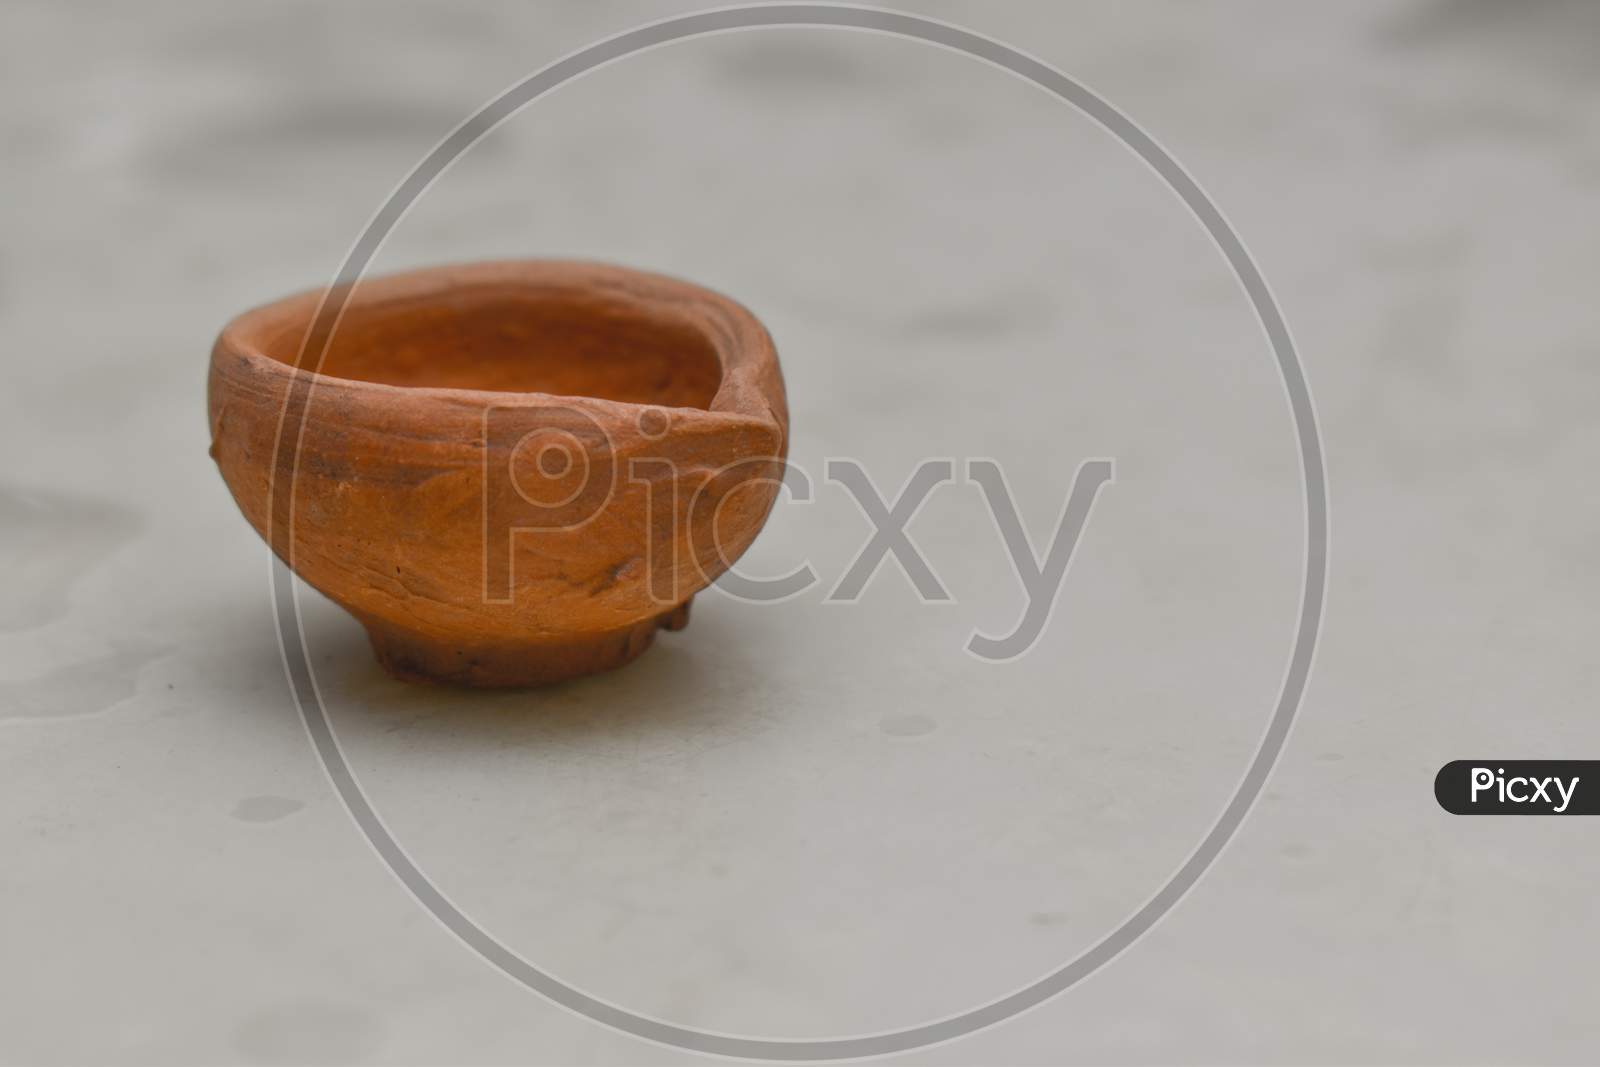 Indian Clay Oil Lamp Or Diya For Diwali Festival Use To Decorate Home,Temples And Other Places.